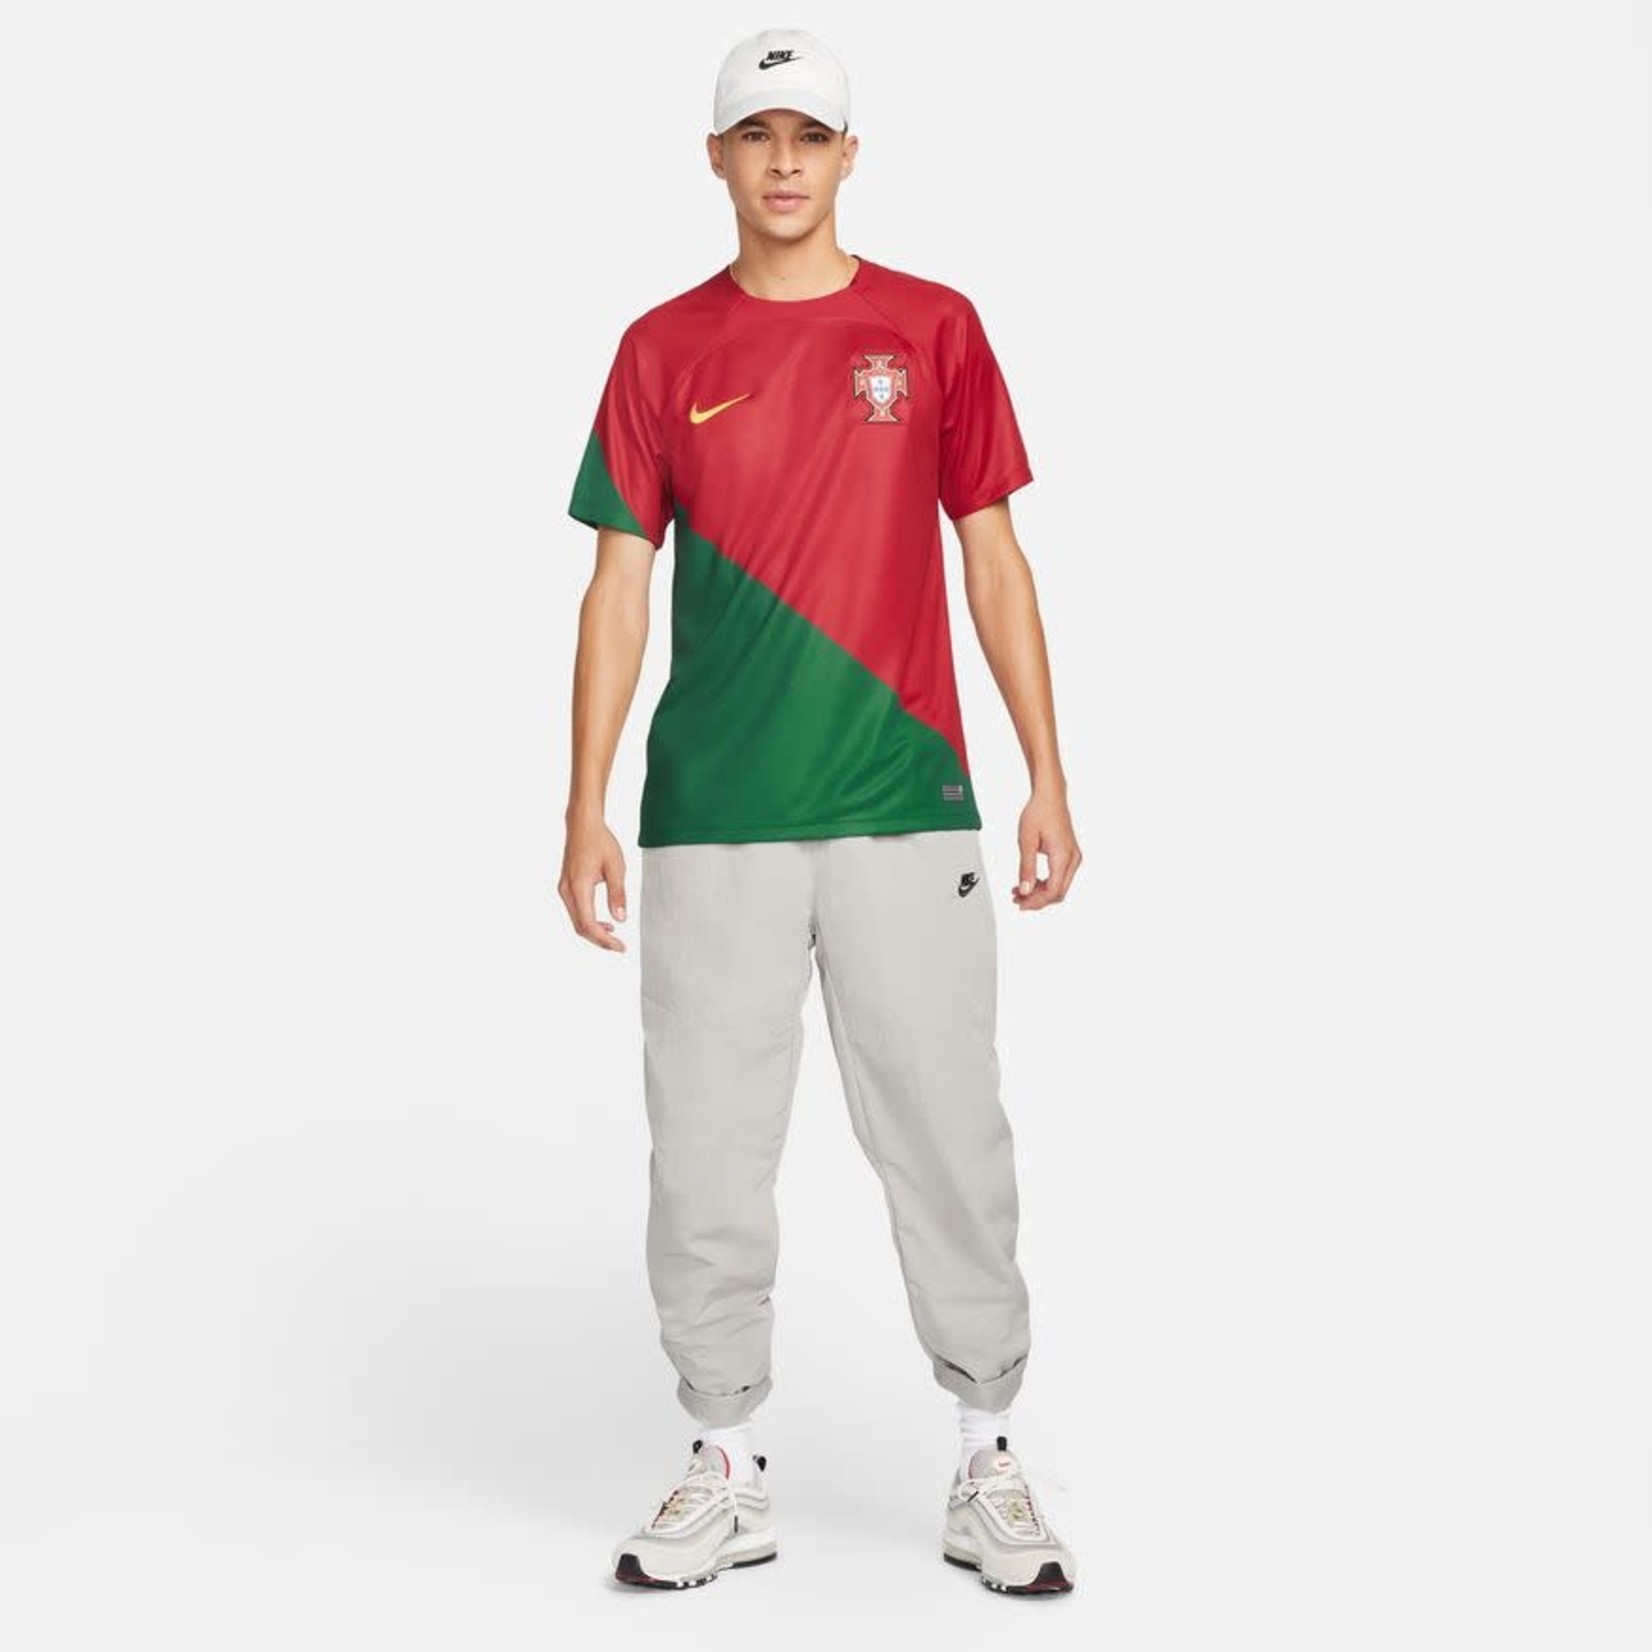 world cup jerseys 2022 portugal